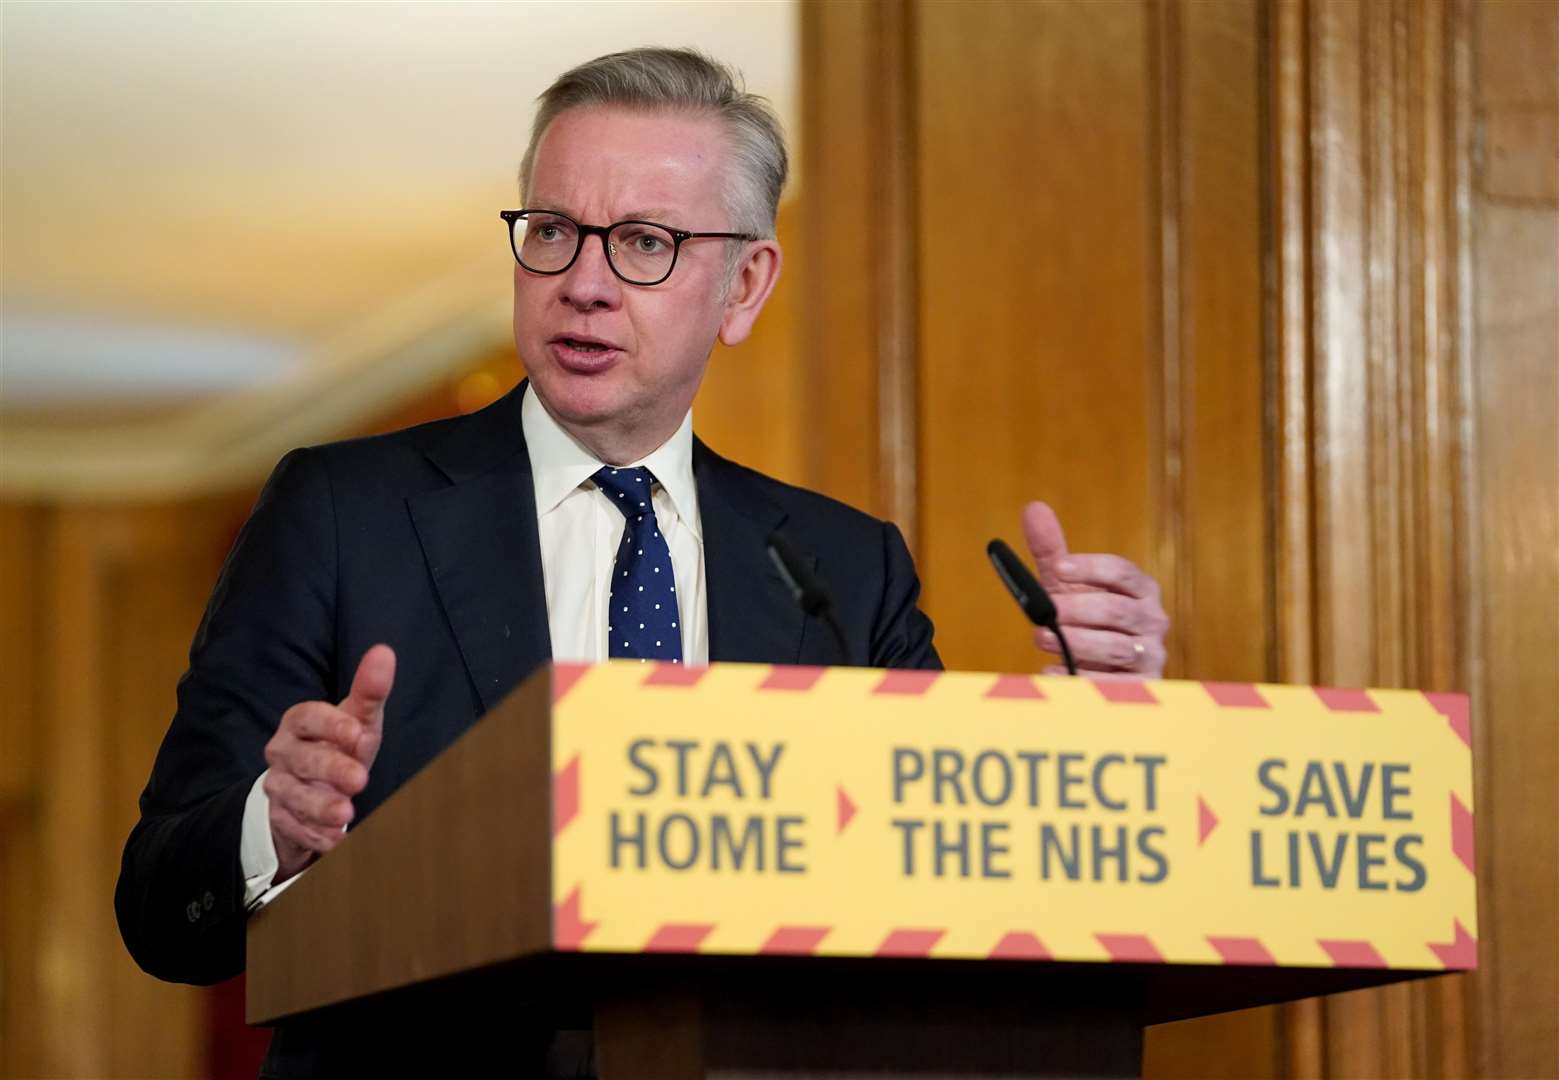 Michael Gove said the lockdown measures are under constant review (Number 10 handout/PA)